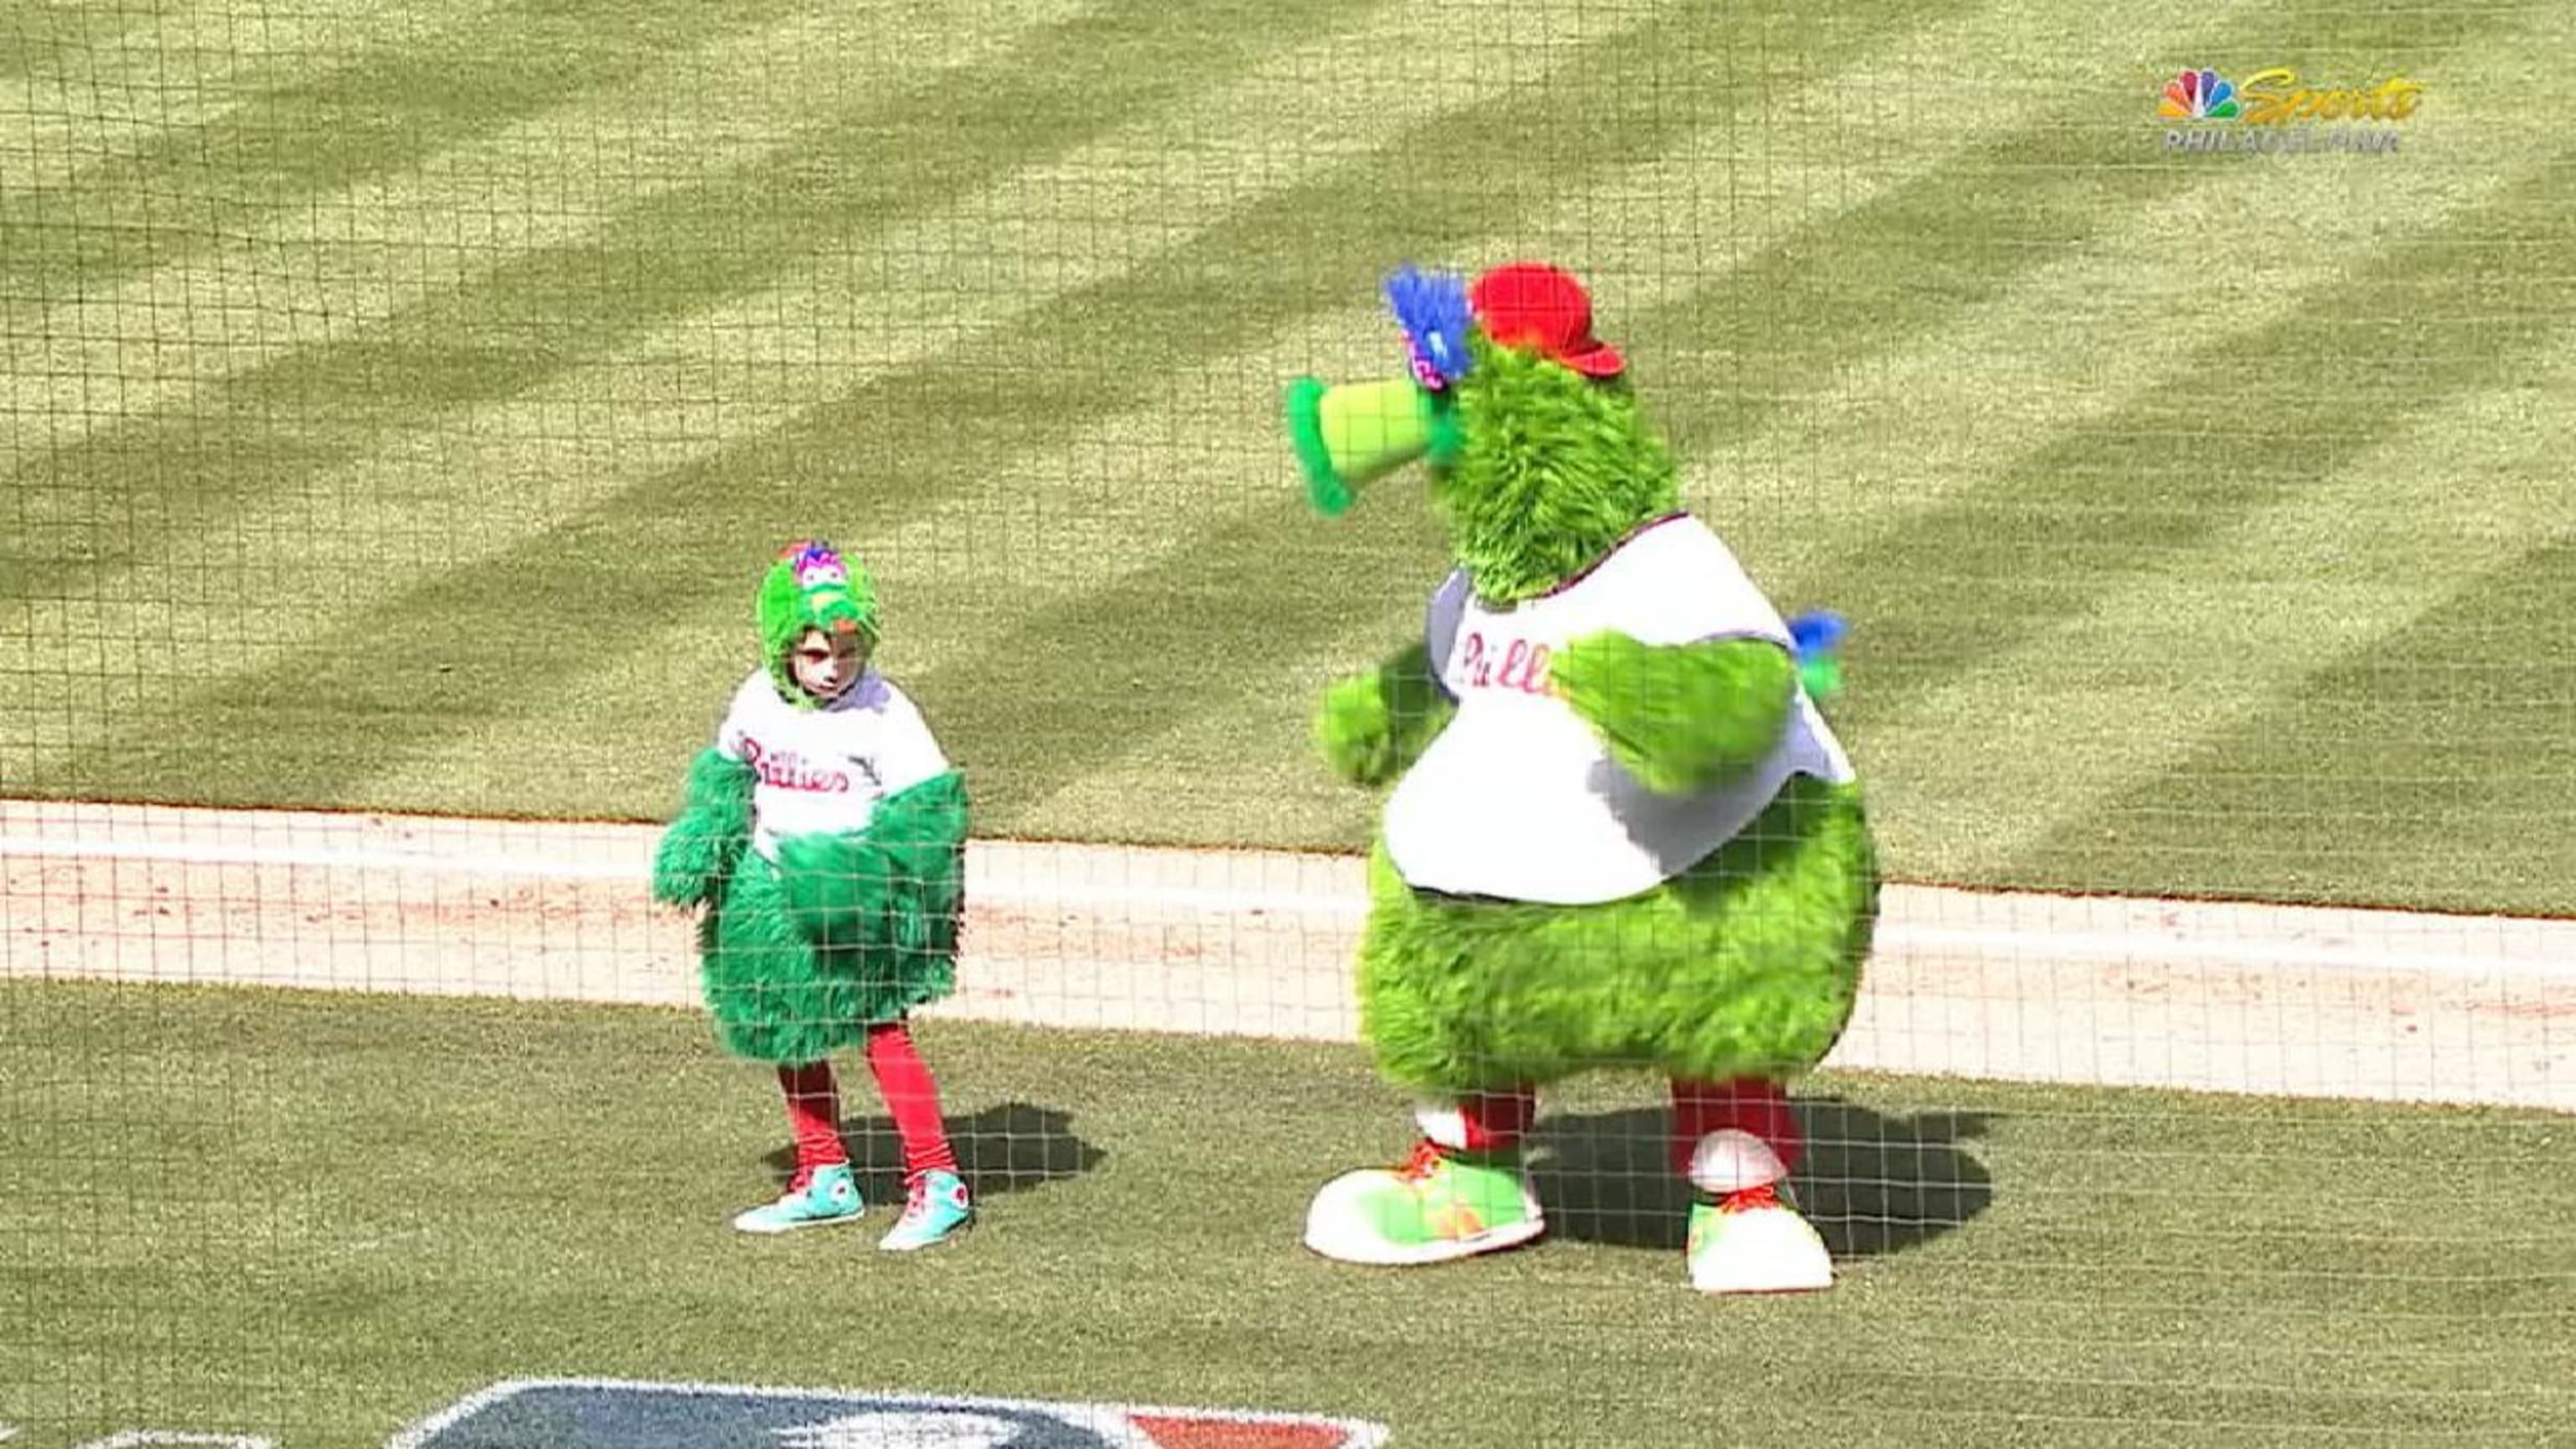 A day in the life of the Phillie Phanatic - Loquitur